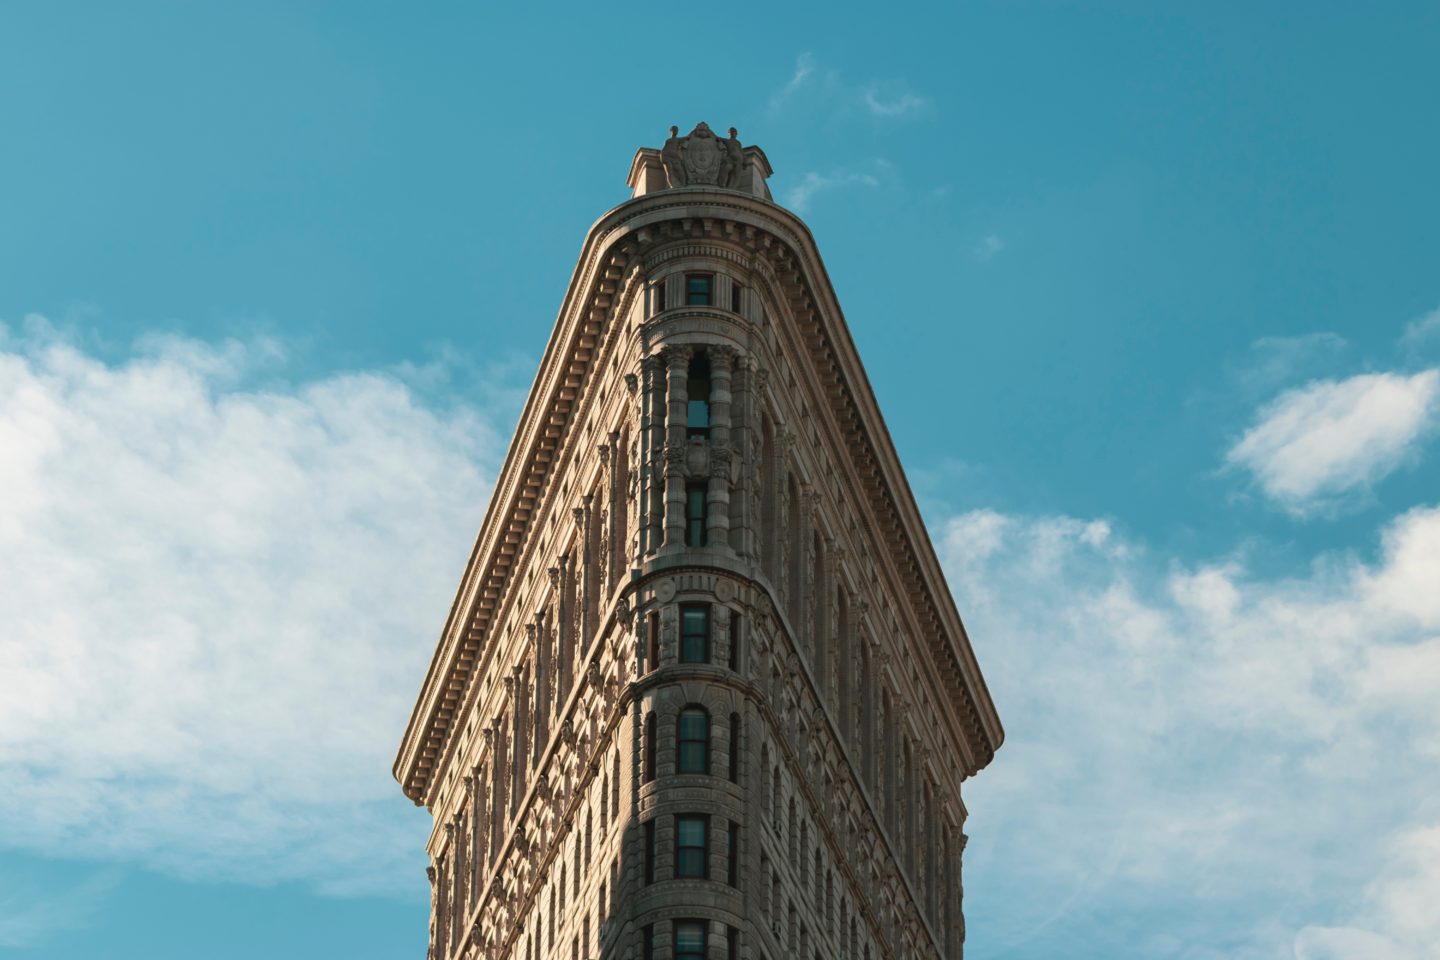 Flatiron building against a blue sky in NYC